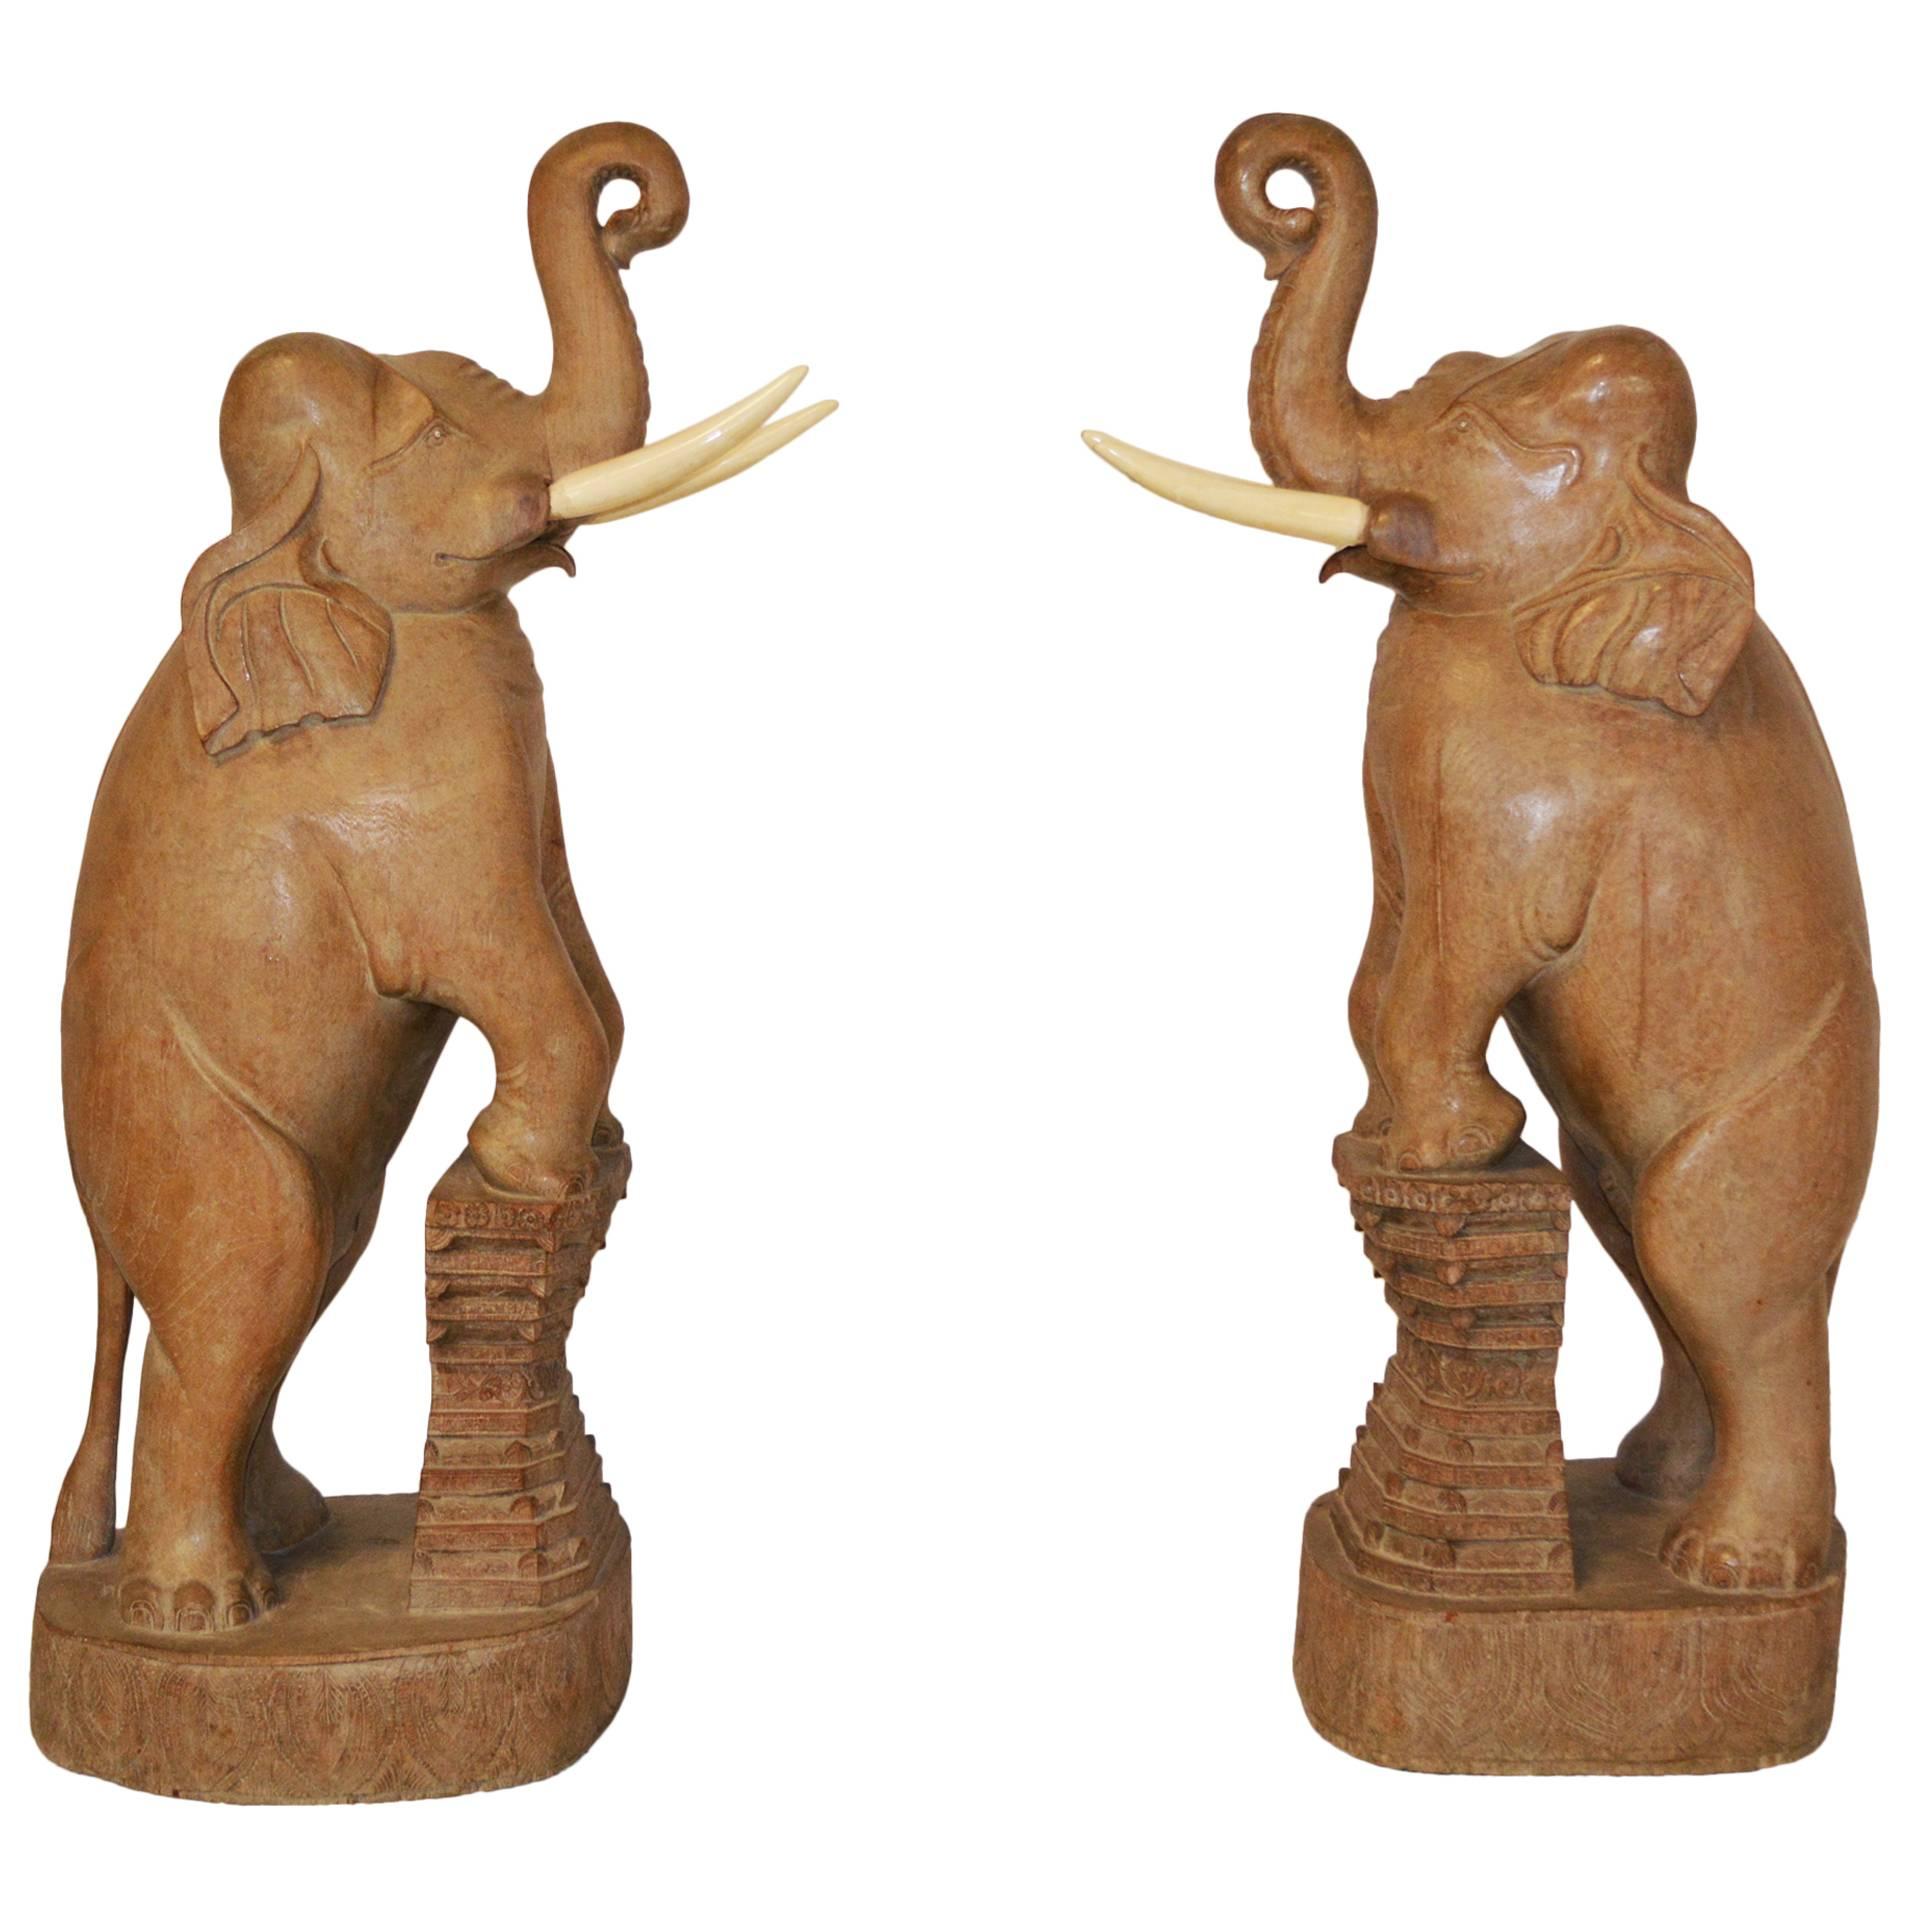 Pair of Carved Wood Elephants from "Auntie Mame" with Rosalind Russell For Sale